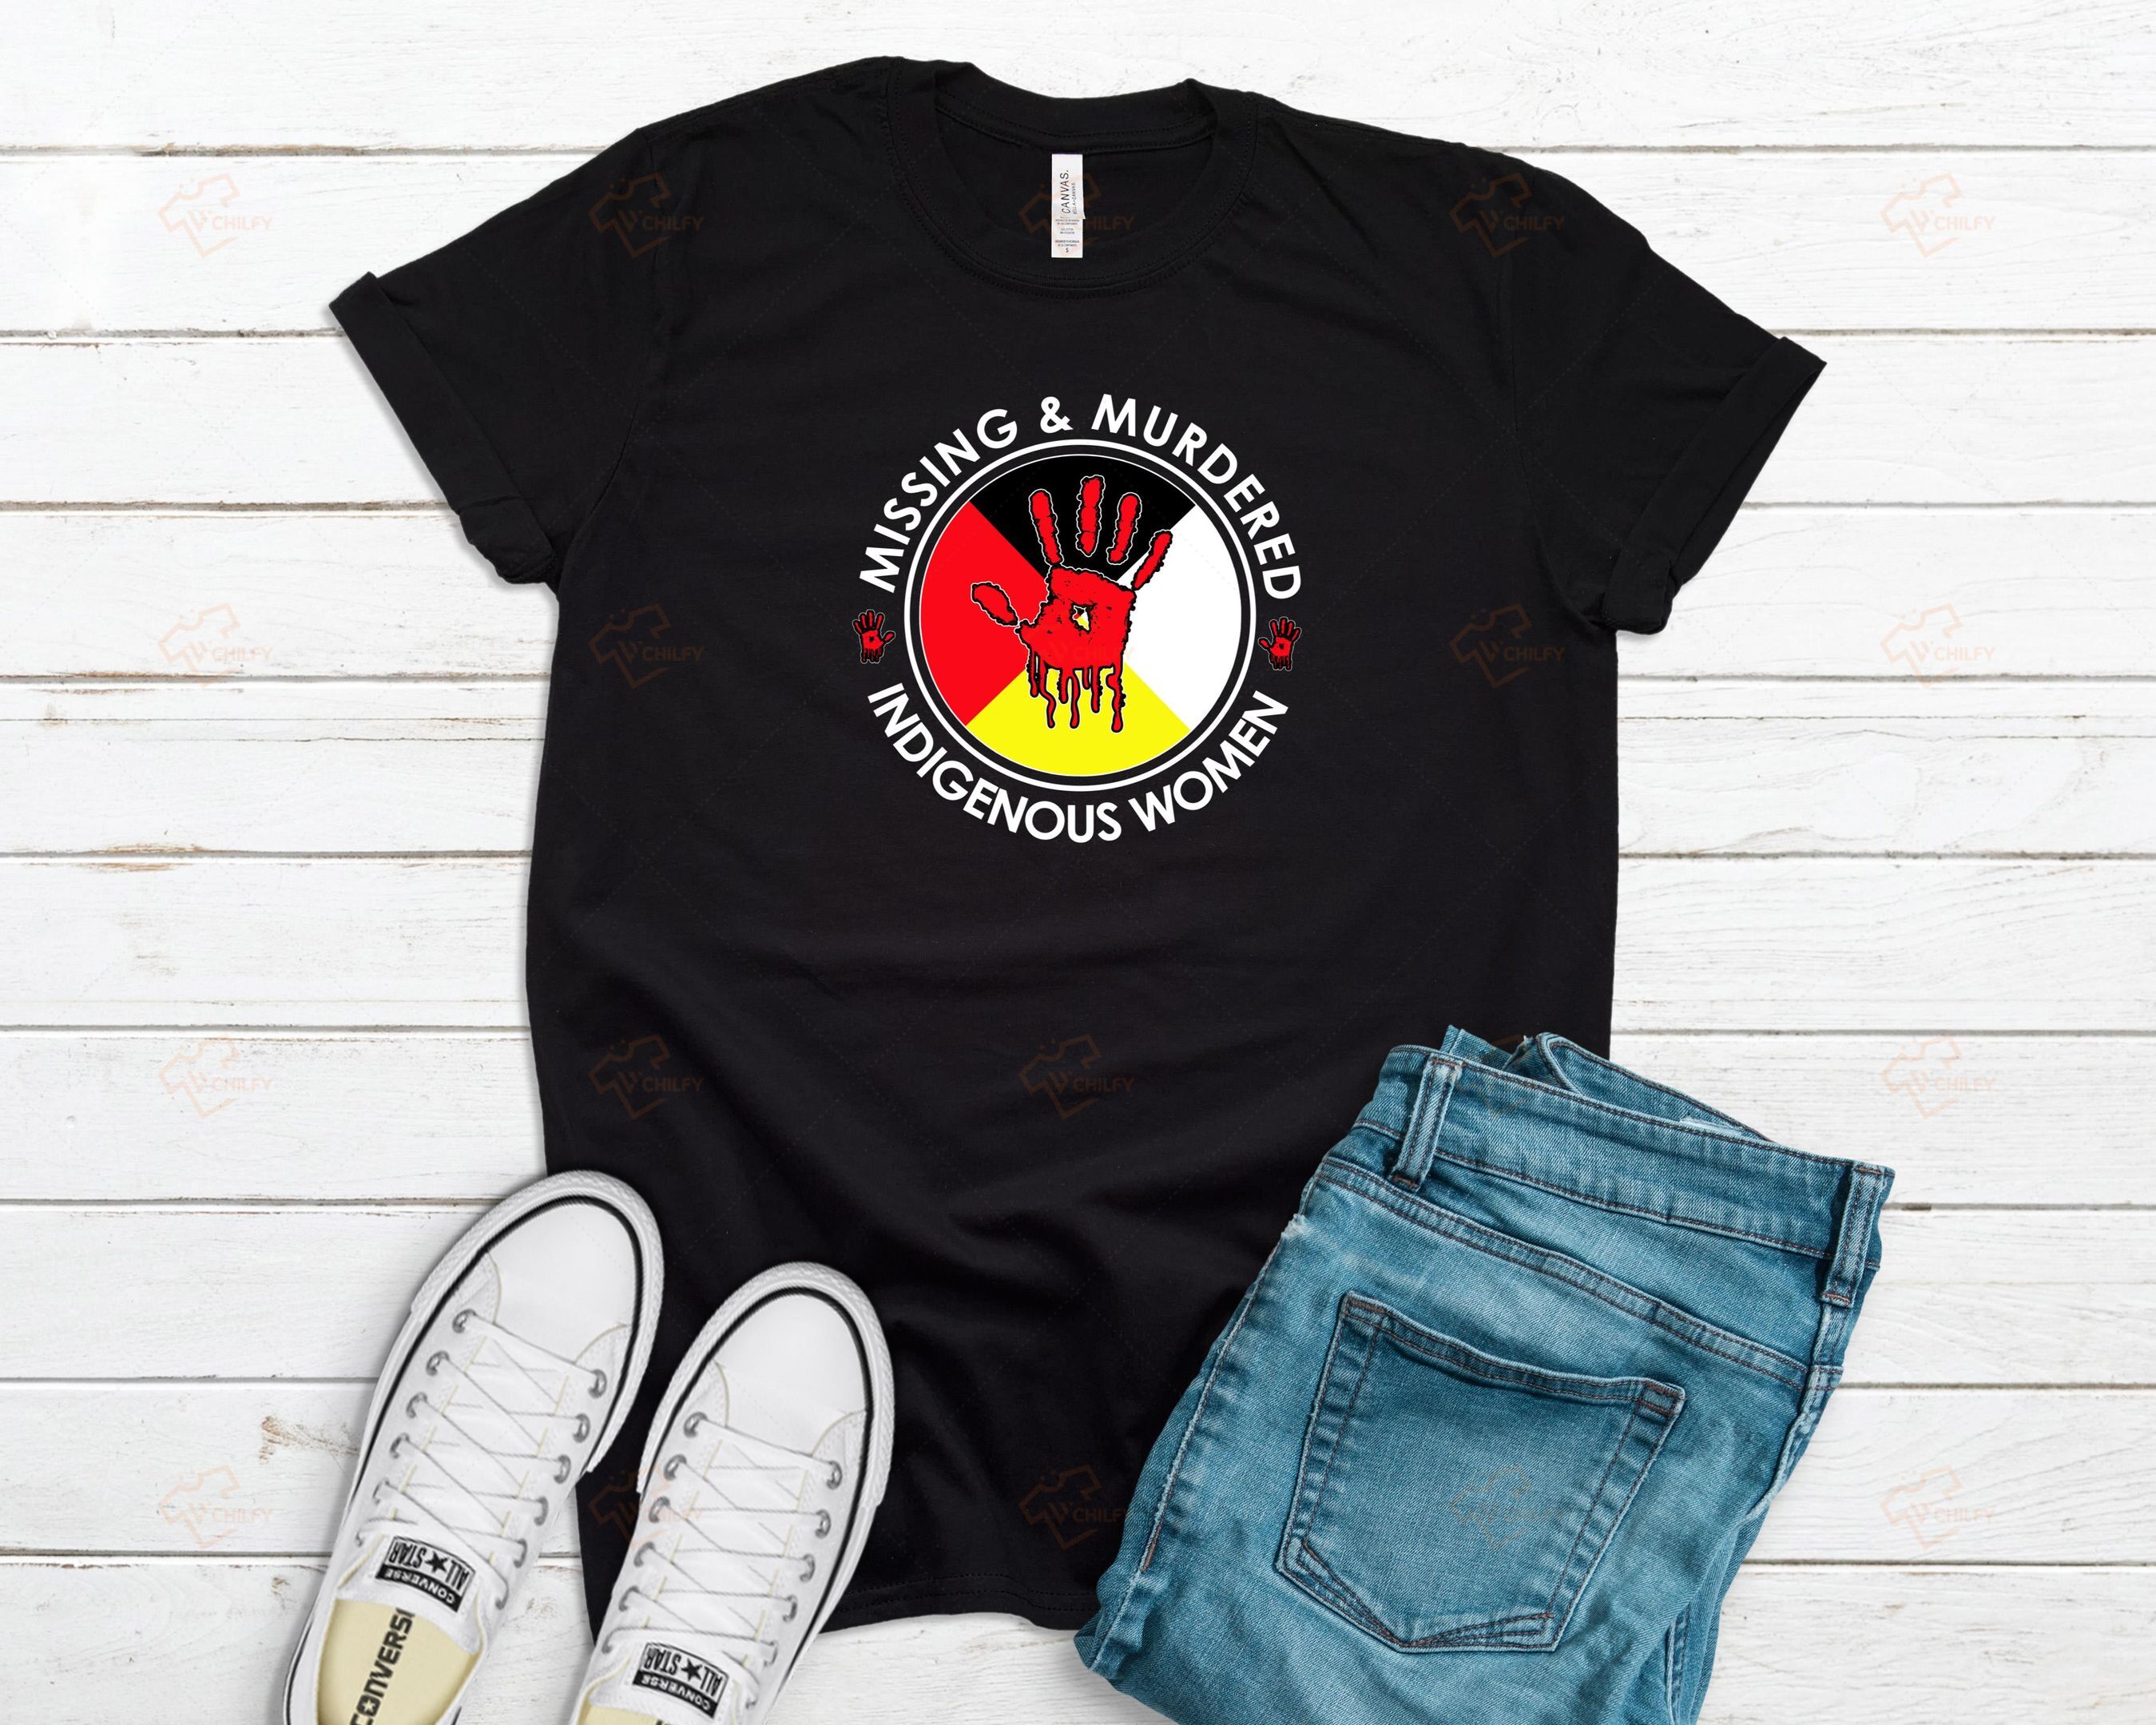 Missing and murdered indigenous women shirt, badass Native t shirt, Native American shirt, gift for Indigenous people